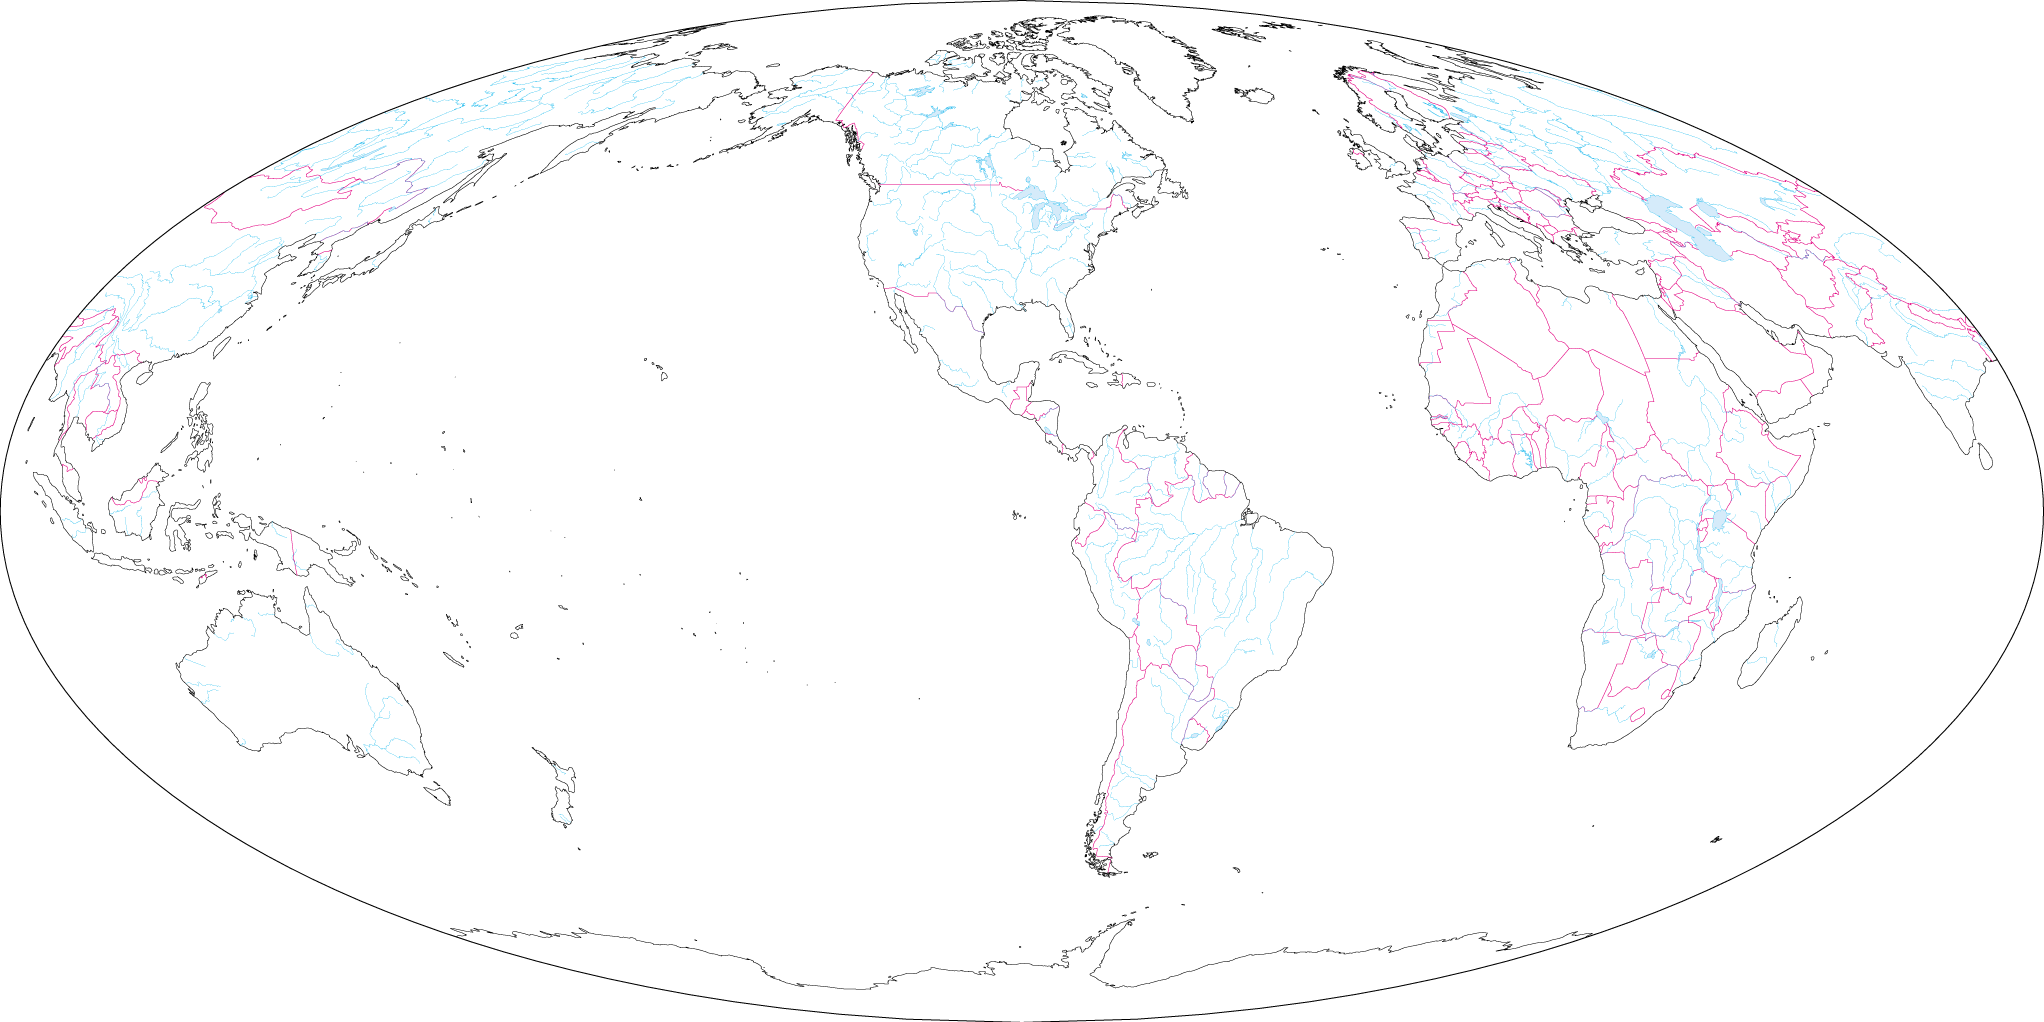 Mollwide projection - America center (With borders) image